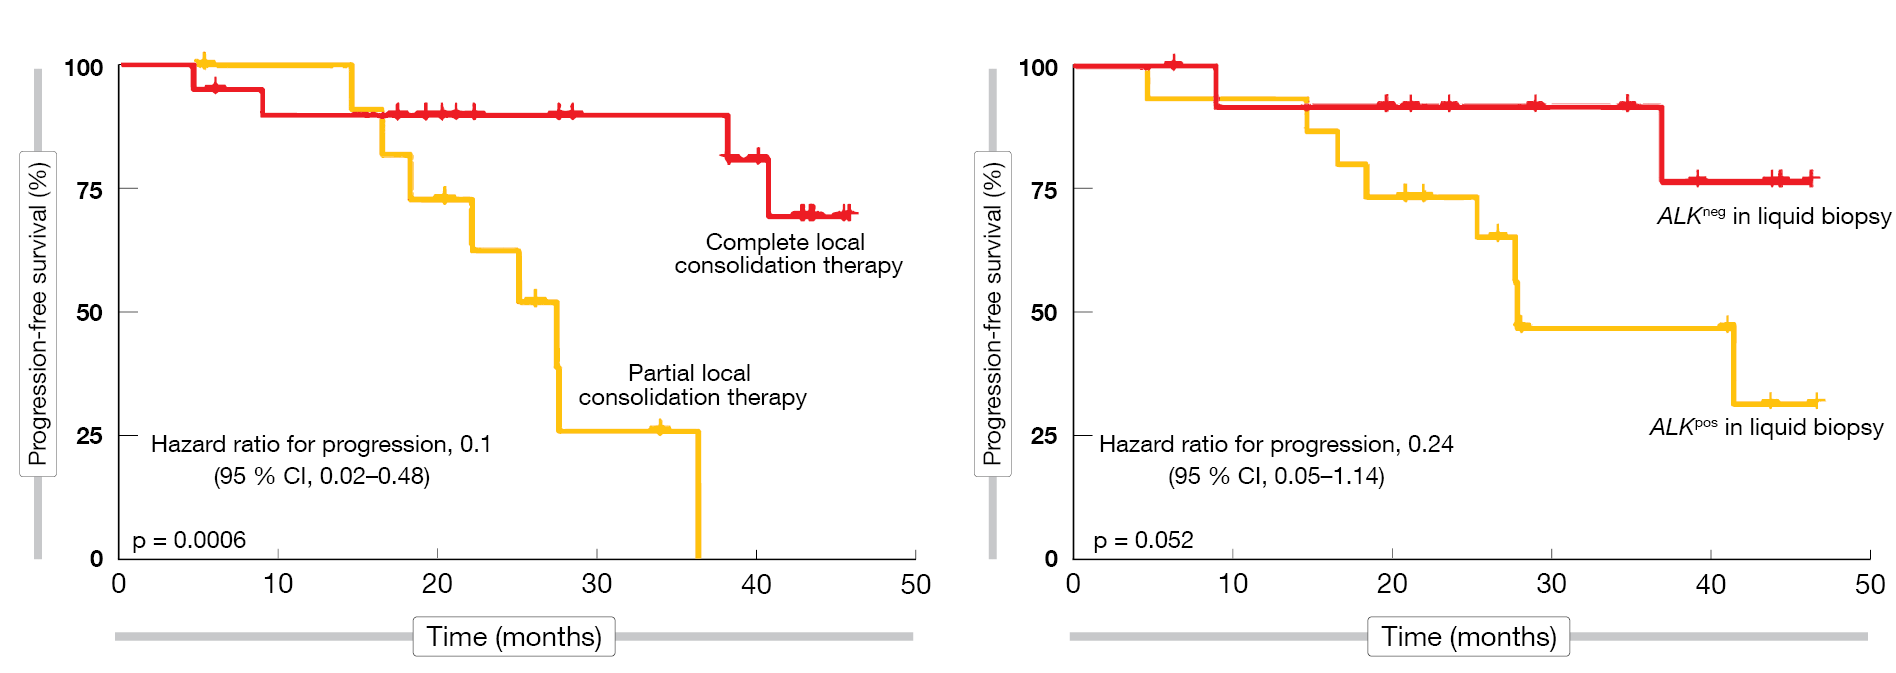 Figure 3: Predictors of progression-free survival benefit with brigatinib plus local consolidation therapy (LCT): complete LCT (left) and ALK negativity at baseline